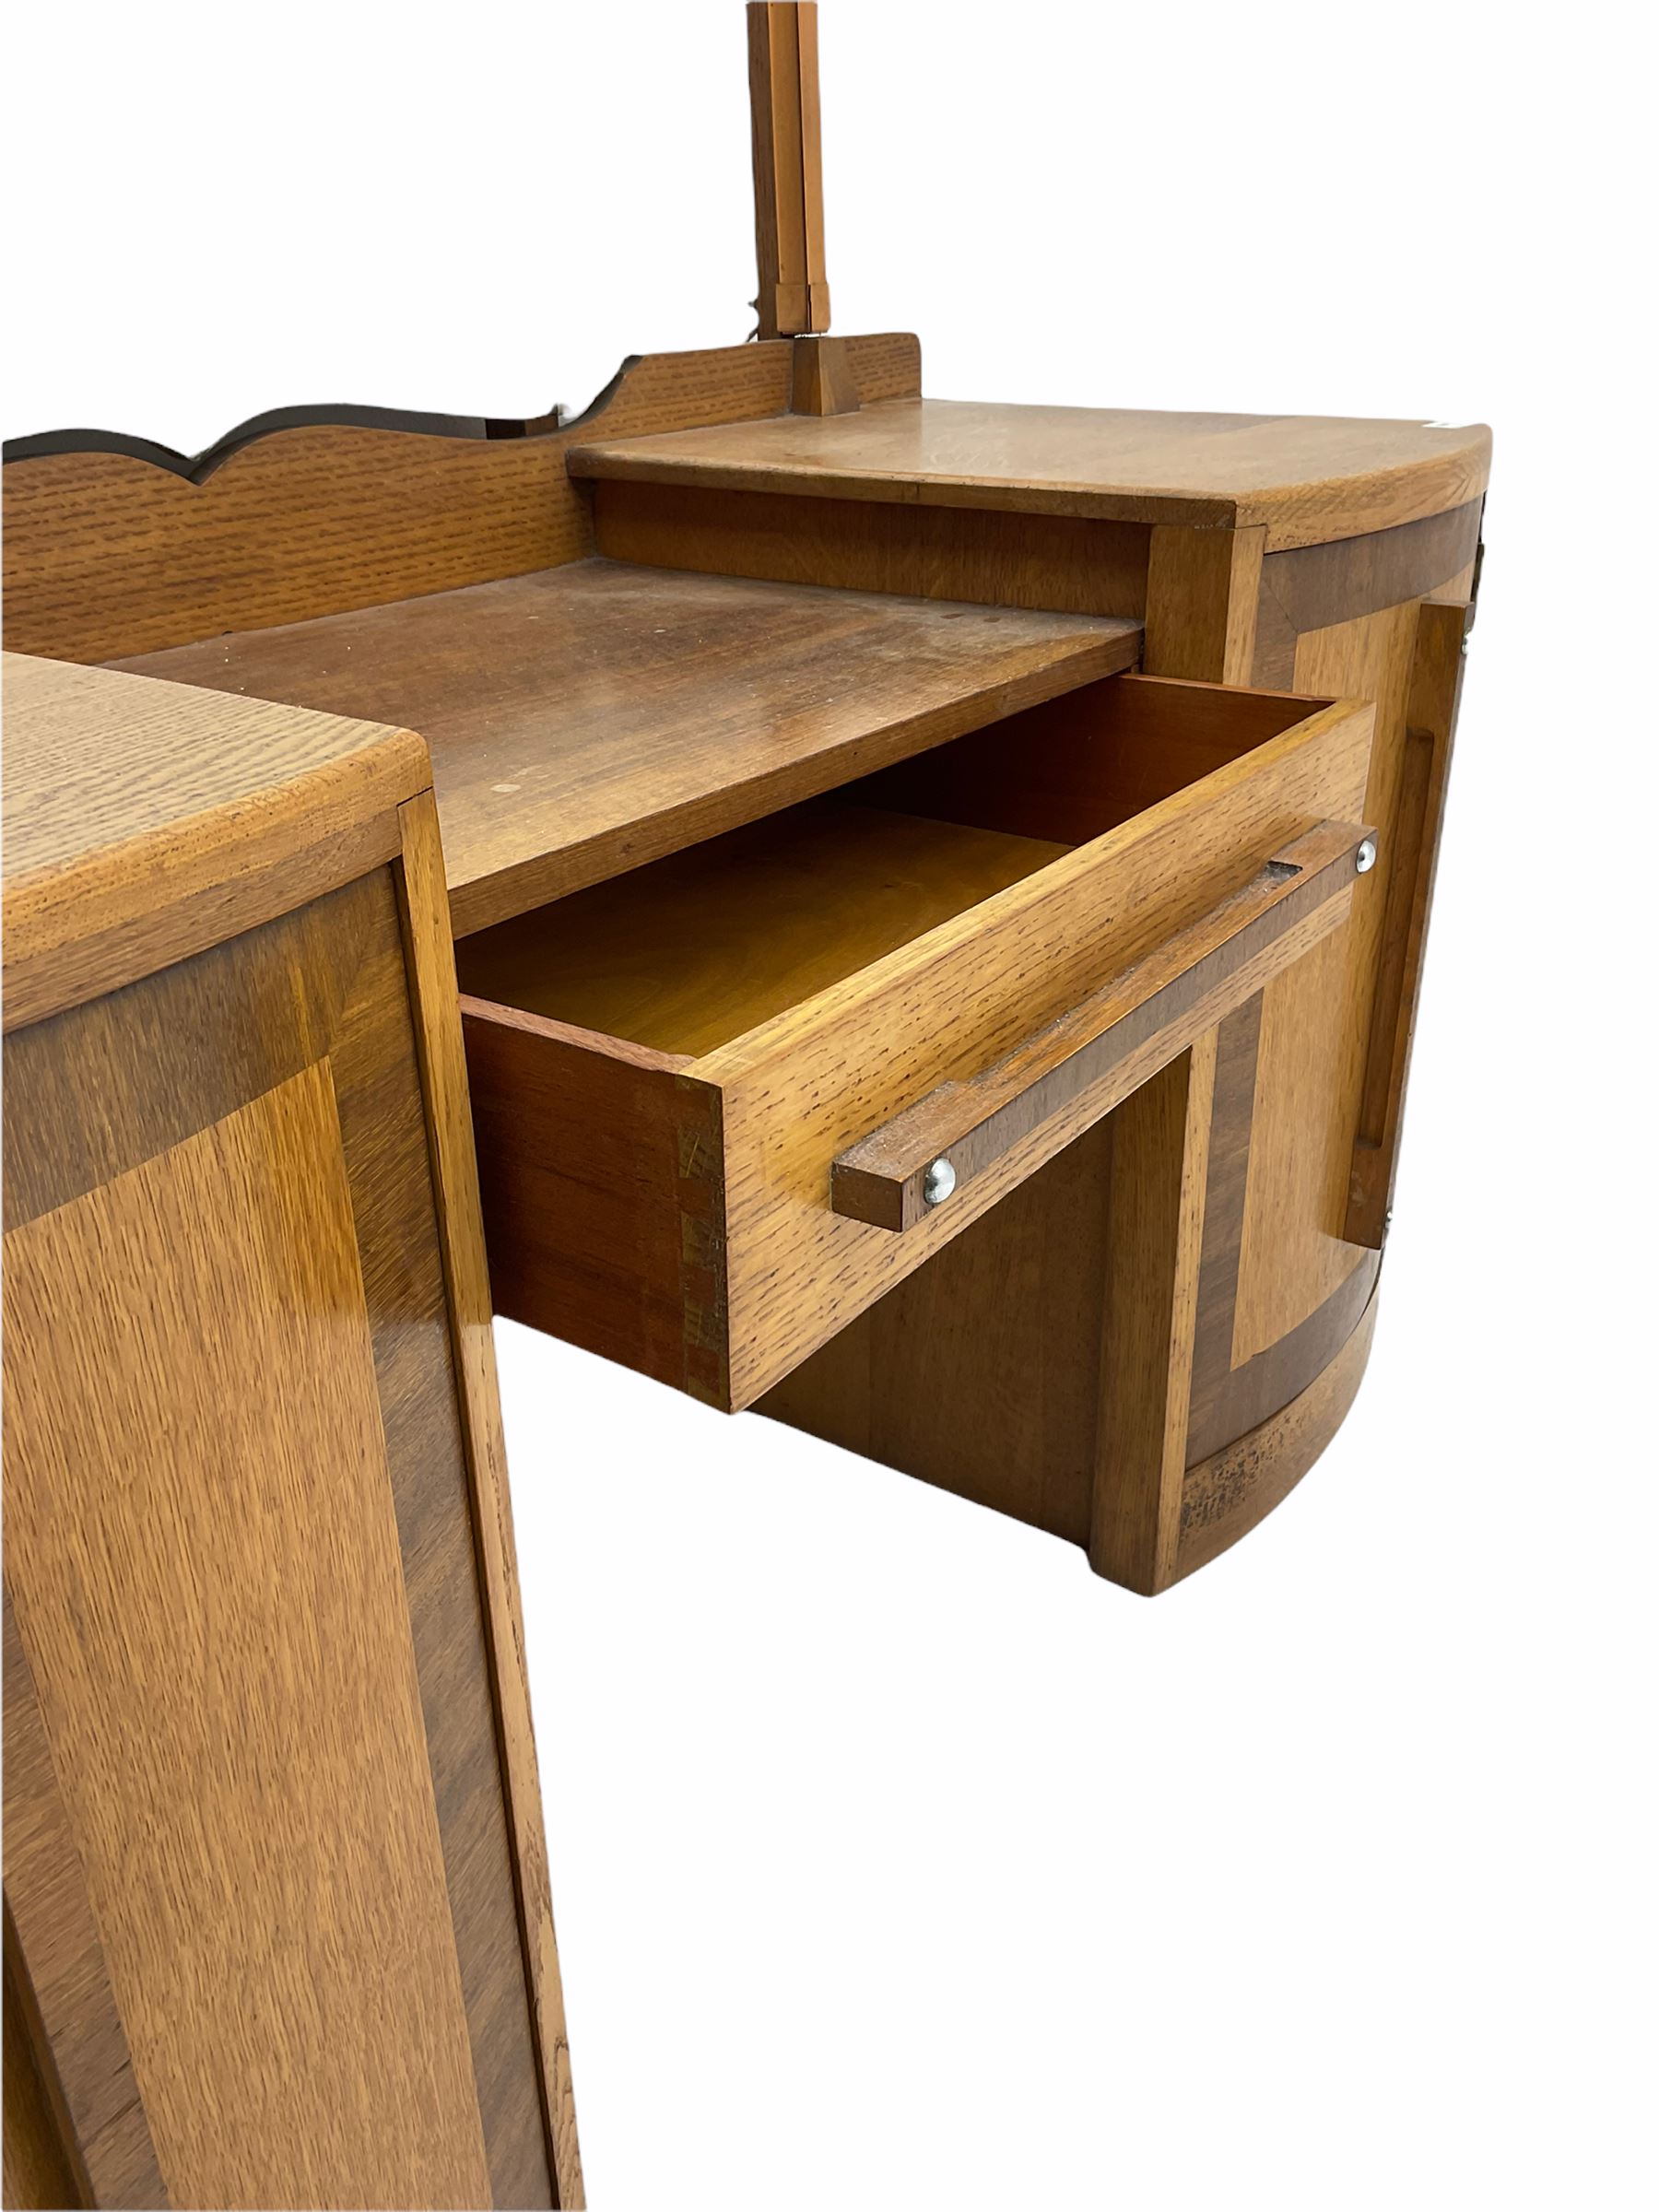 Ernest Gomme - early 20th century Art Deco oak dressing table - Image 5 of 10